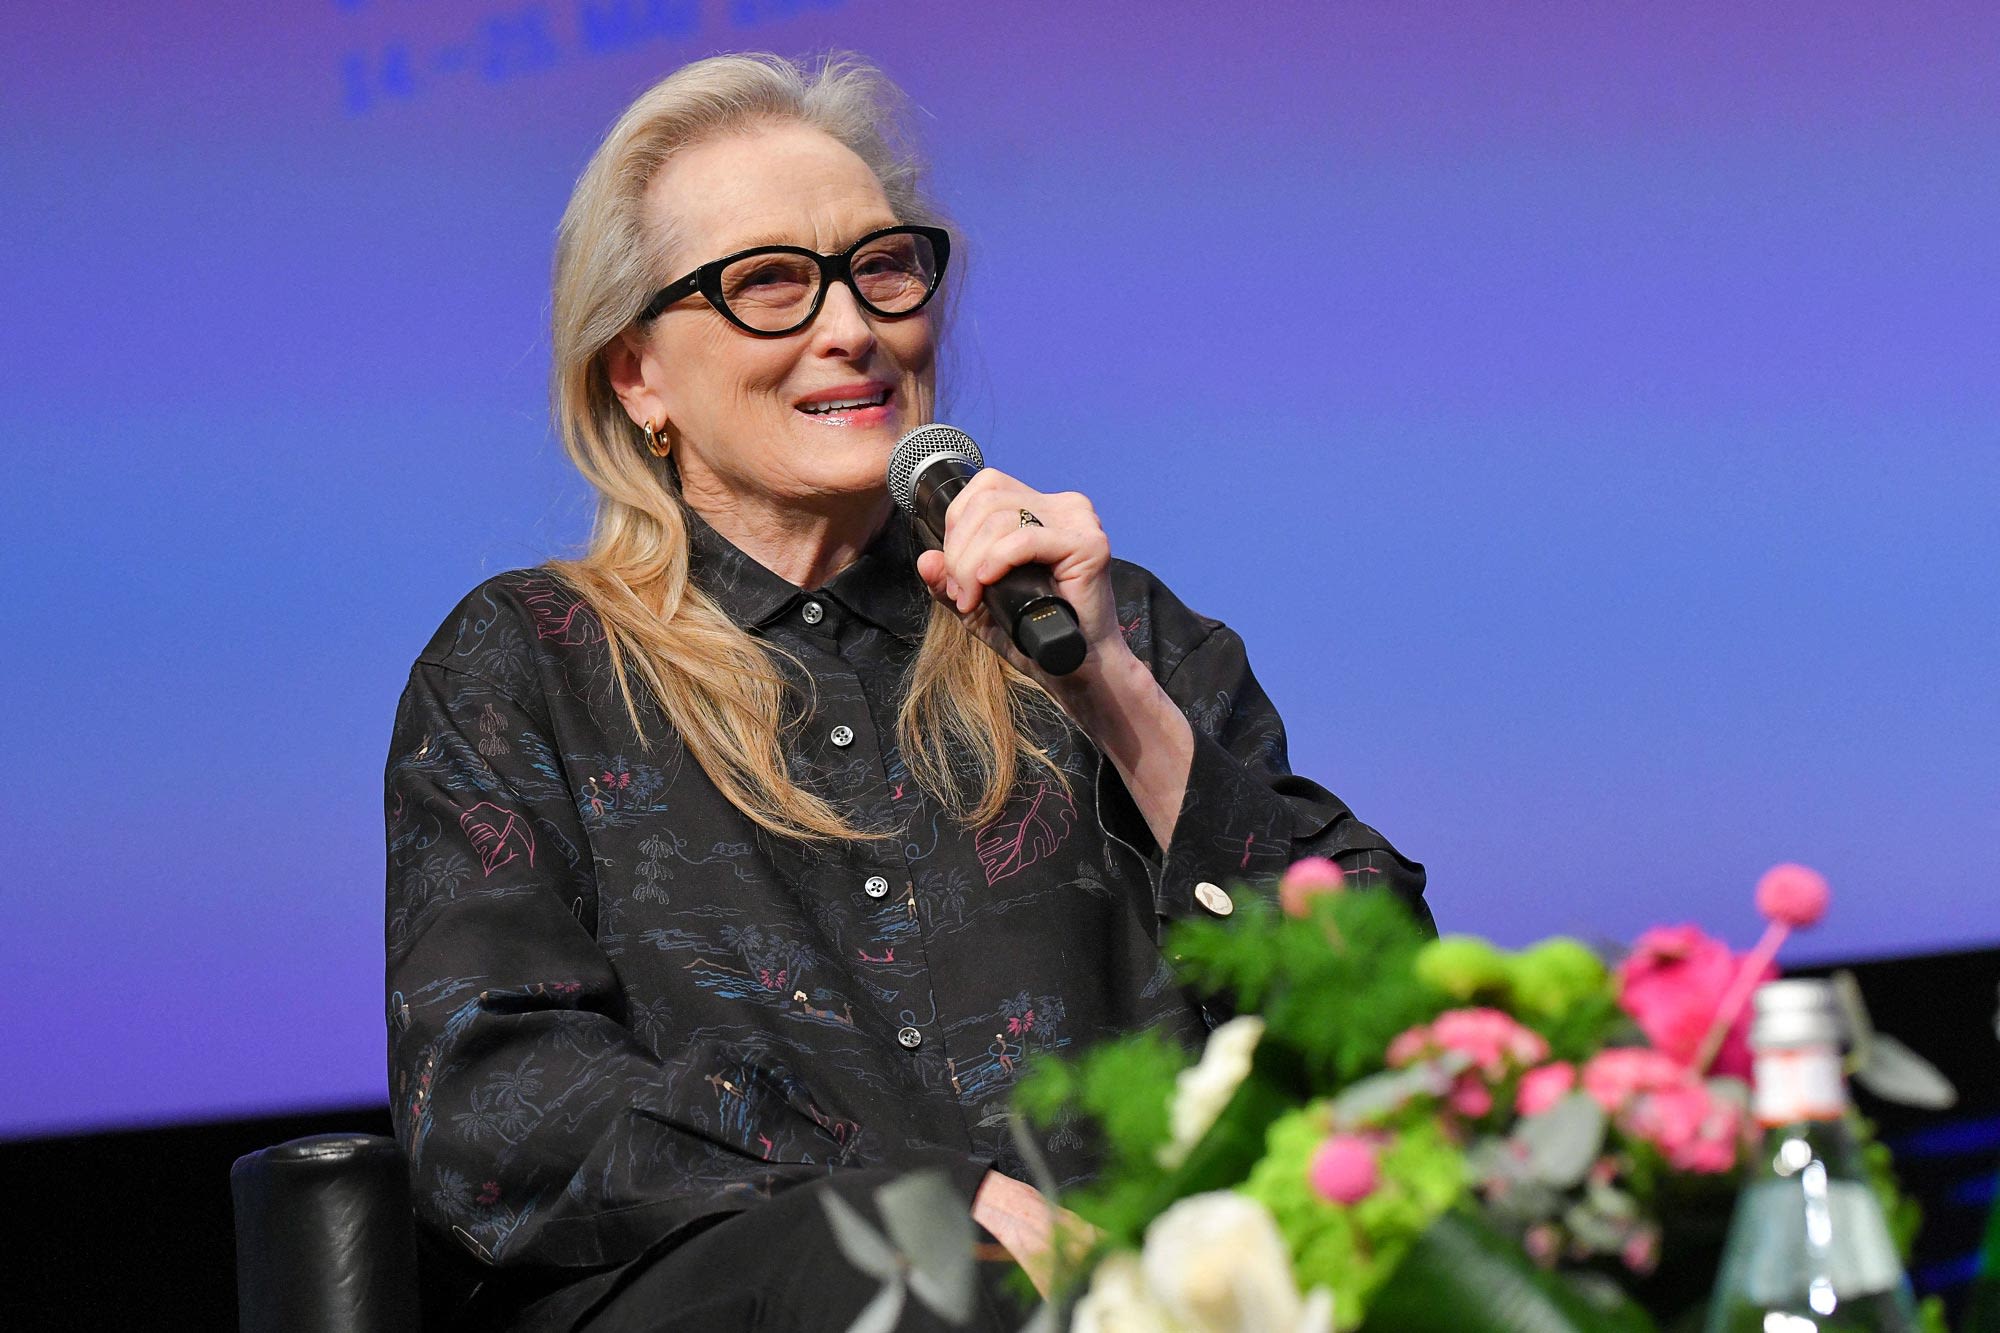 Meryl Streep Says Meeting About Potential Role in ‘Mamma Mia! 3’ Is ‘Imminent’